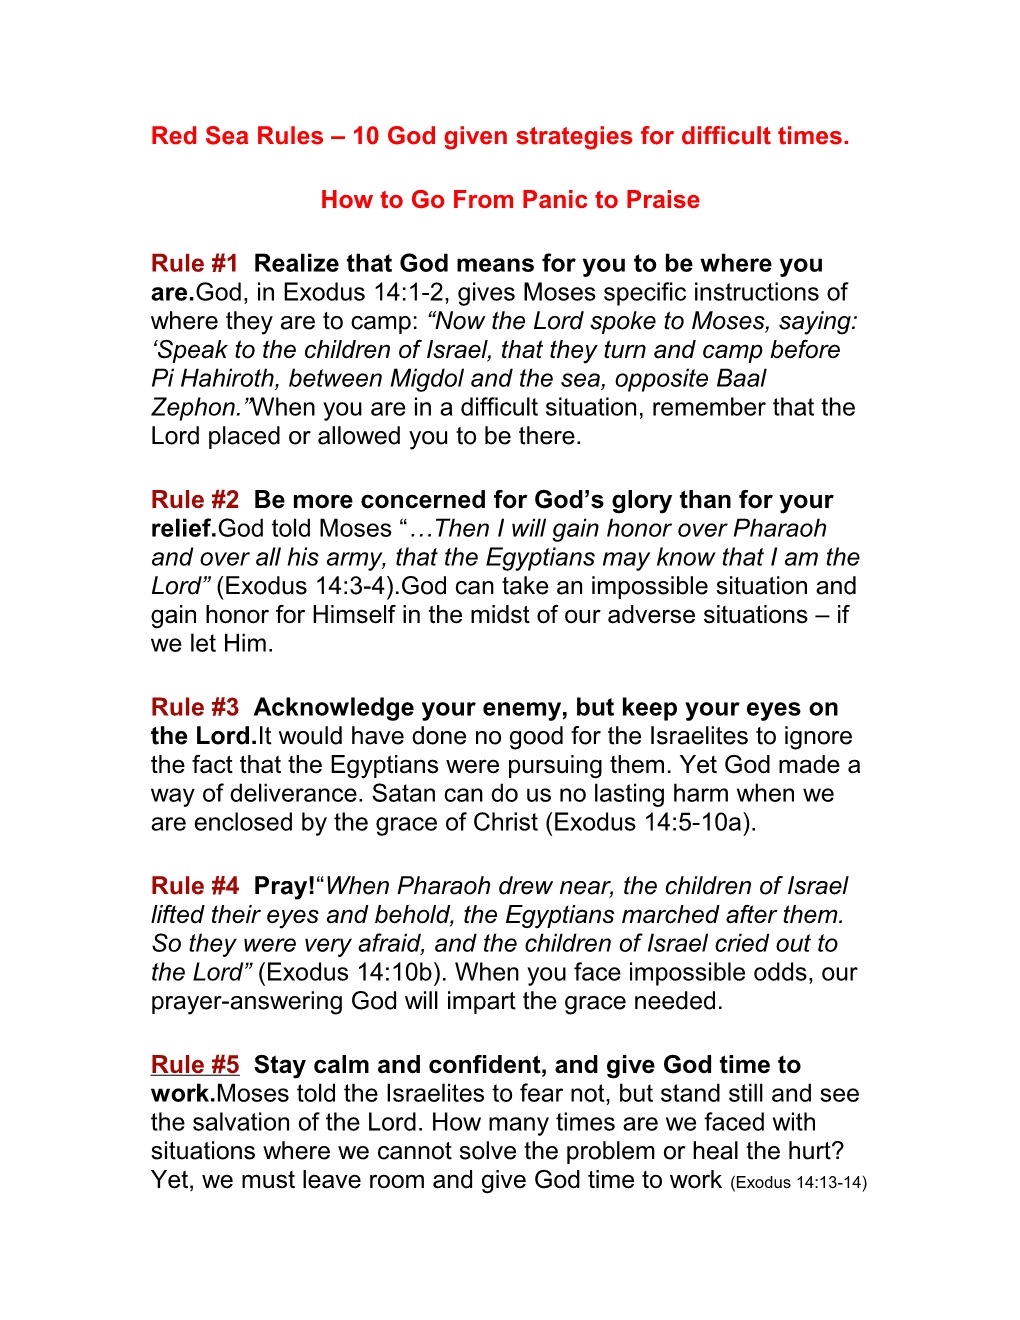 Red Sea Rules 10 God Given Strategies for Difficult Times